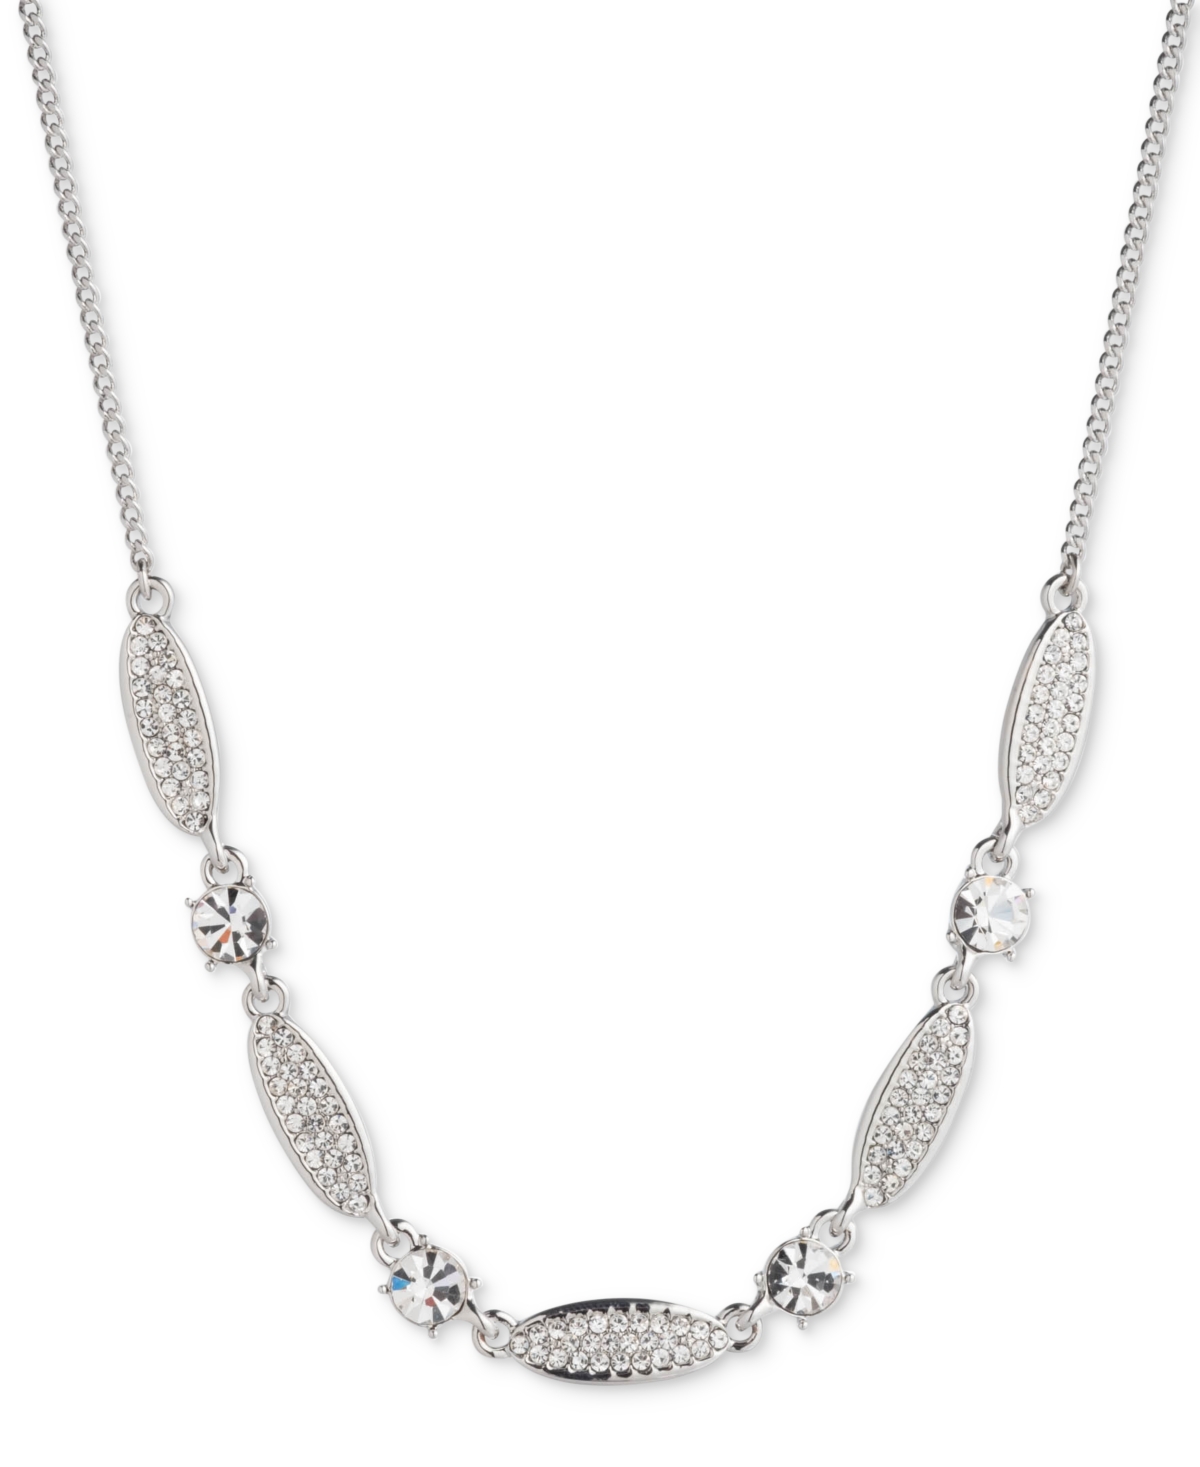 Silver-Tone Pave & Crystal Statement Necklace, 16" + 3" extender - Silver